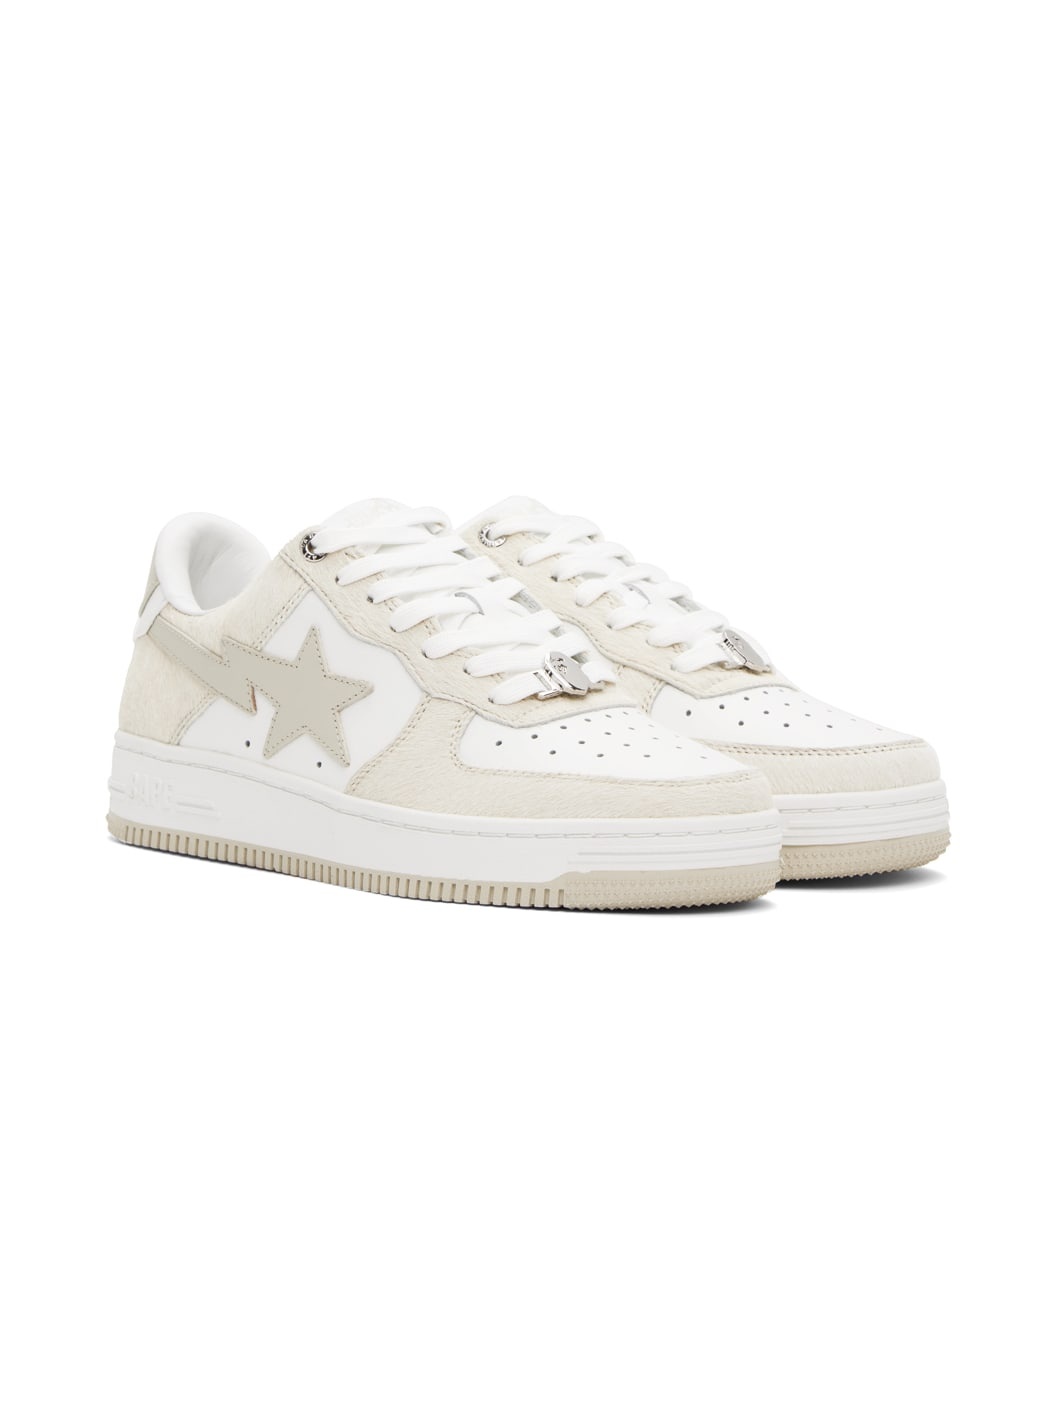 Off-White STA #1 Sneakers - 4